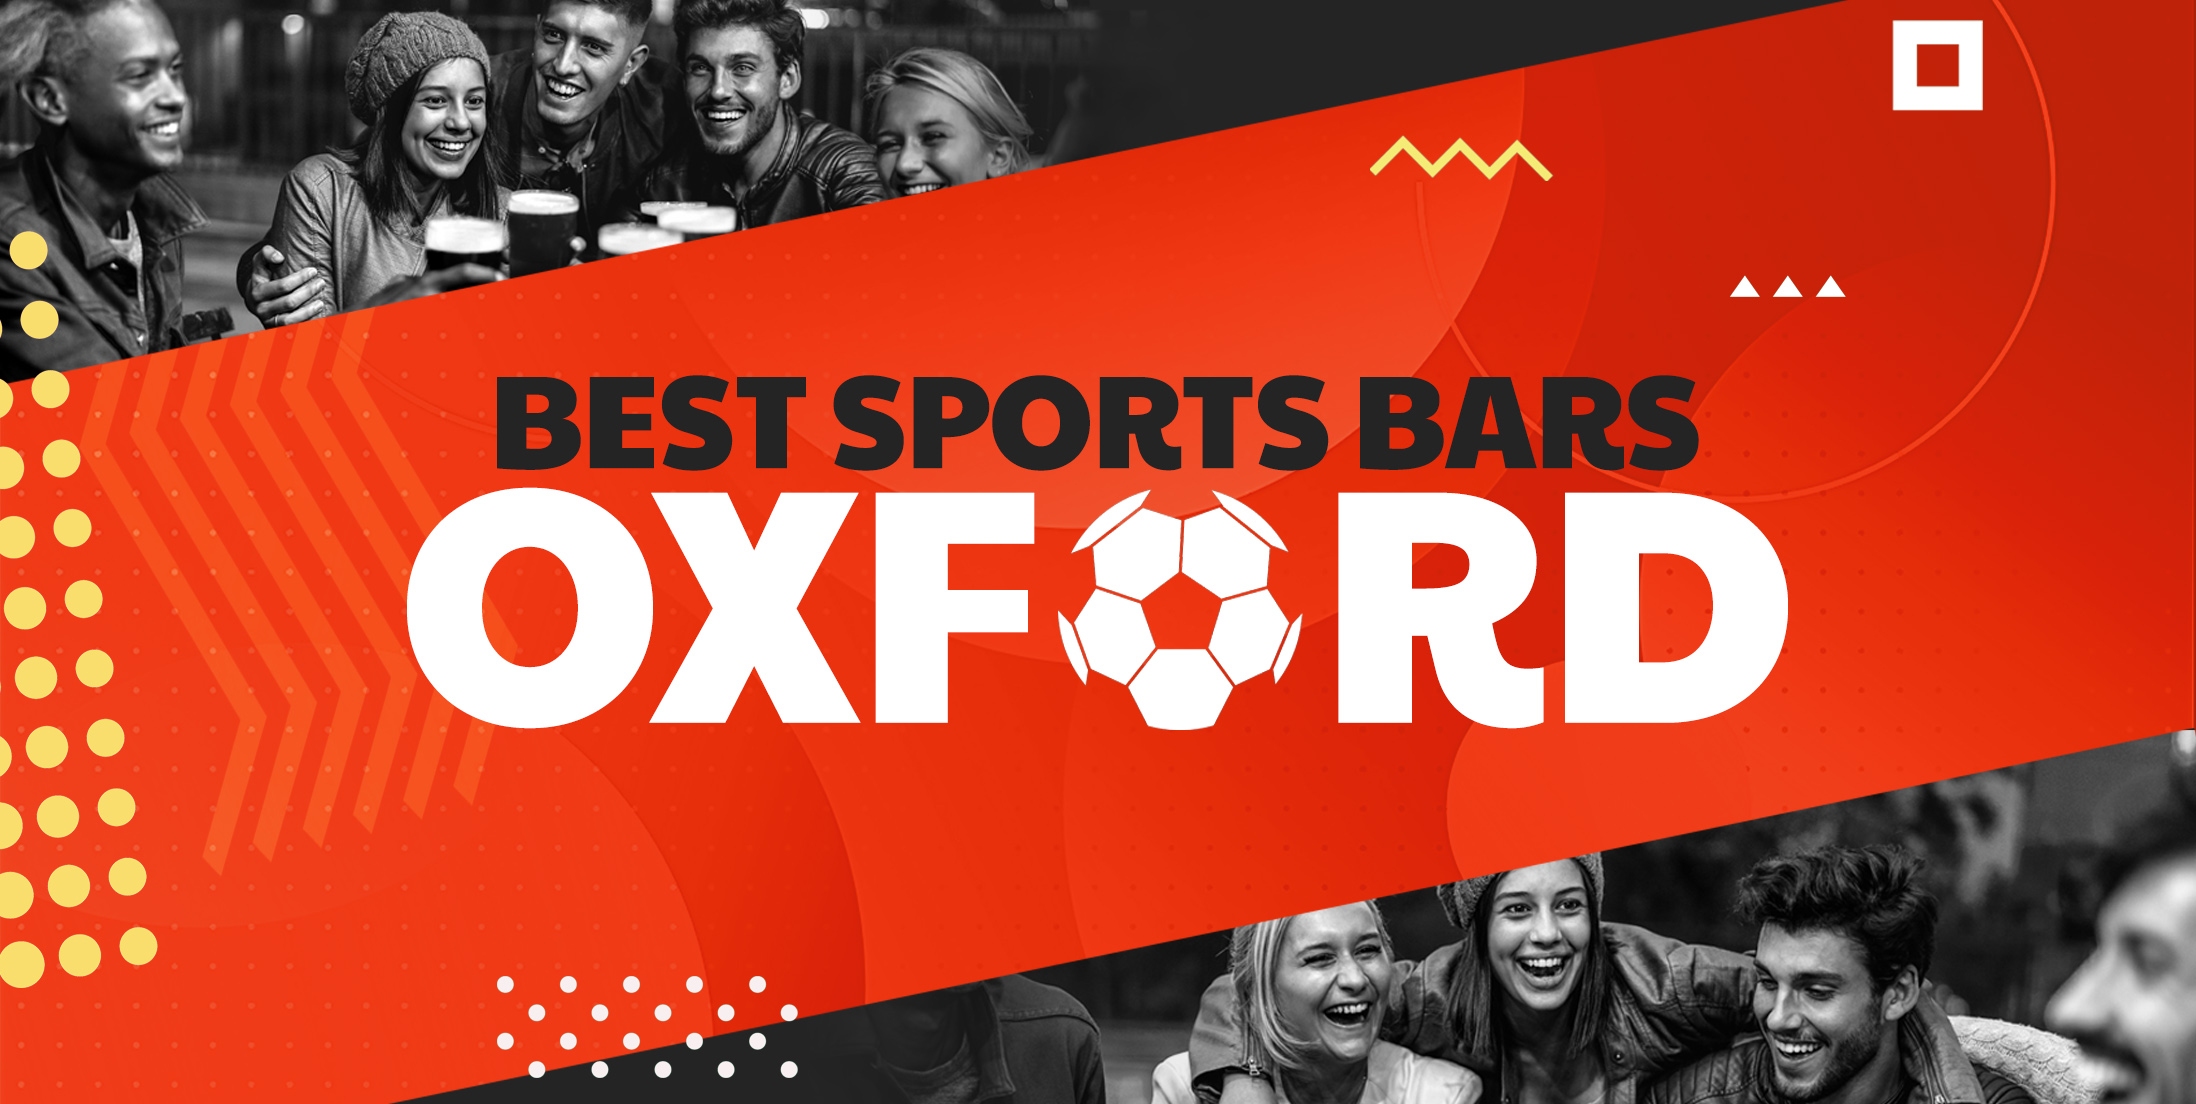 The Best Sports Bars in Oxford